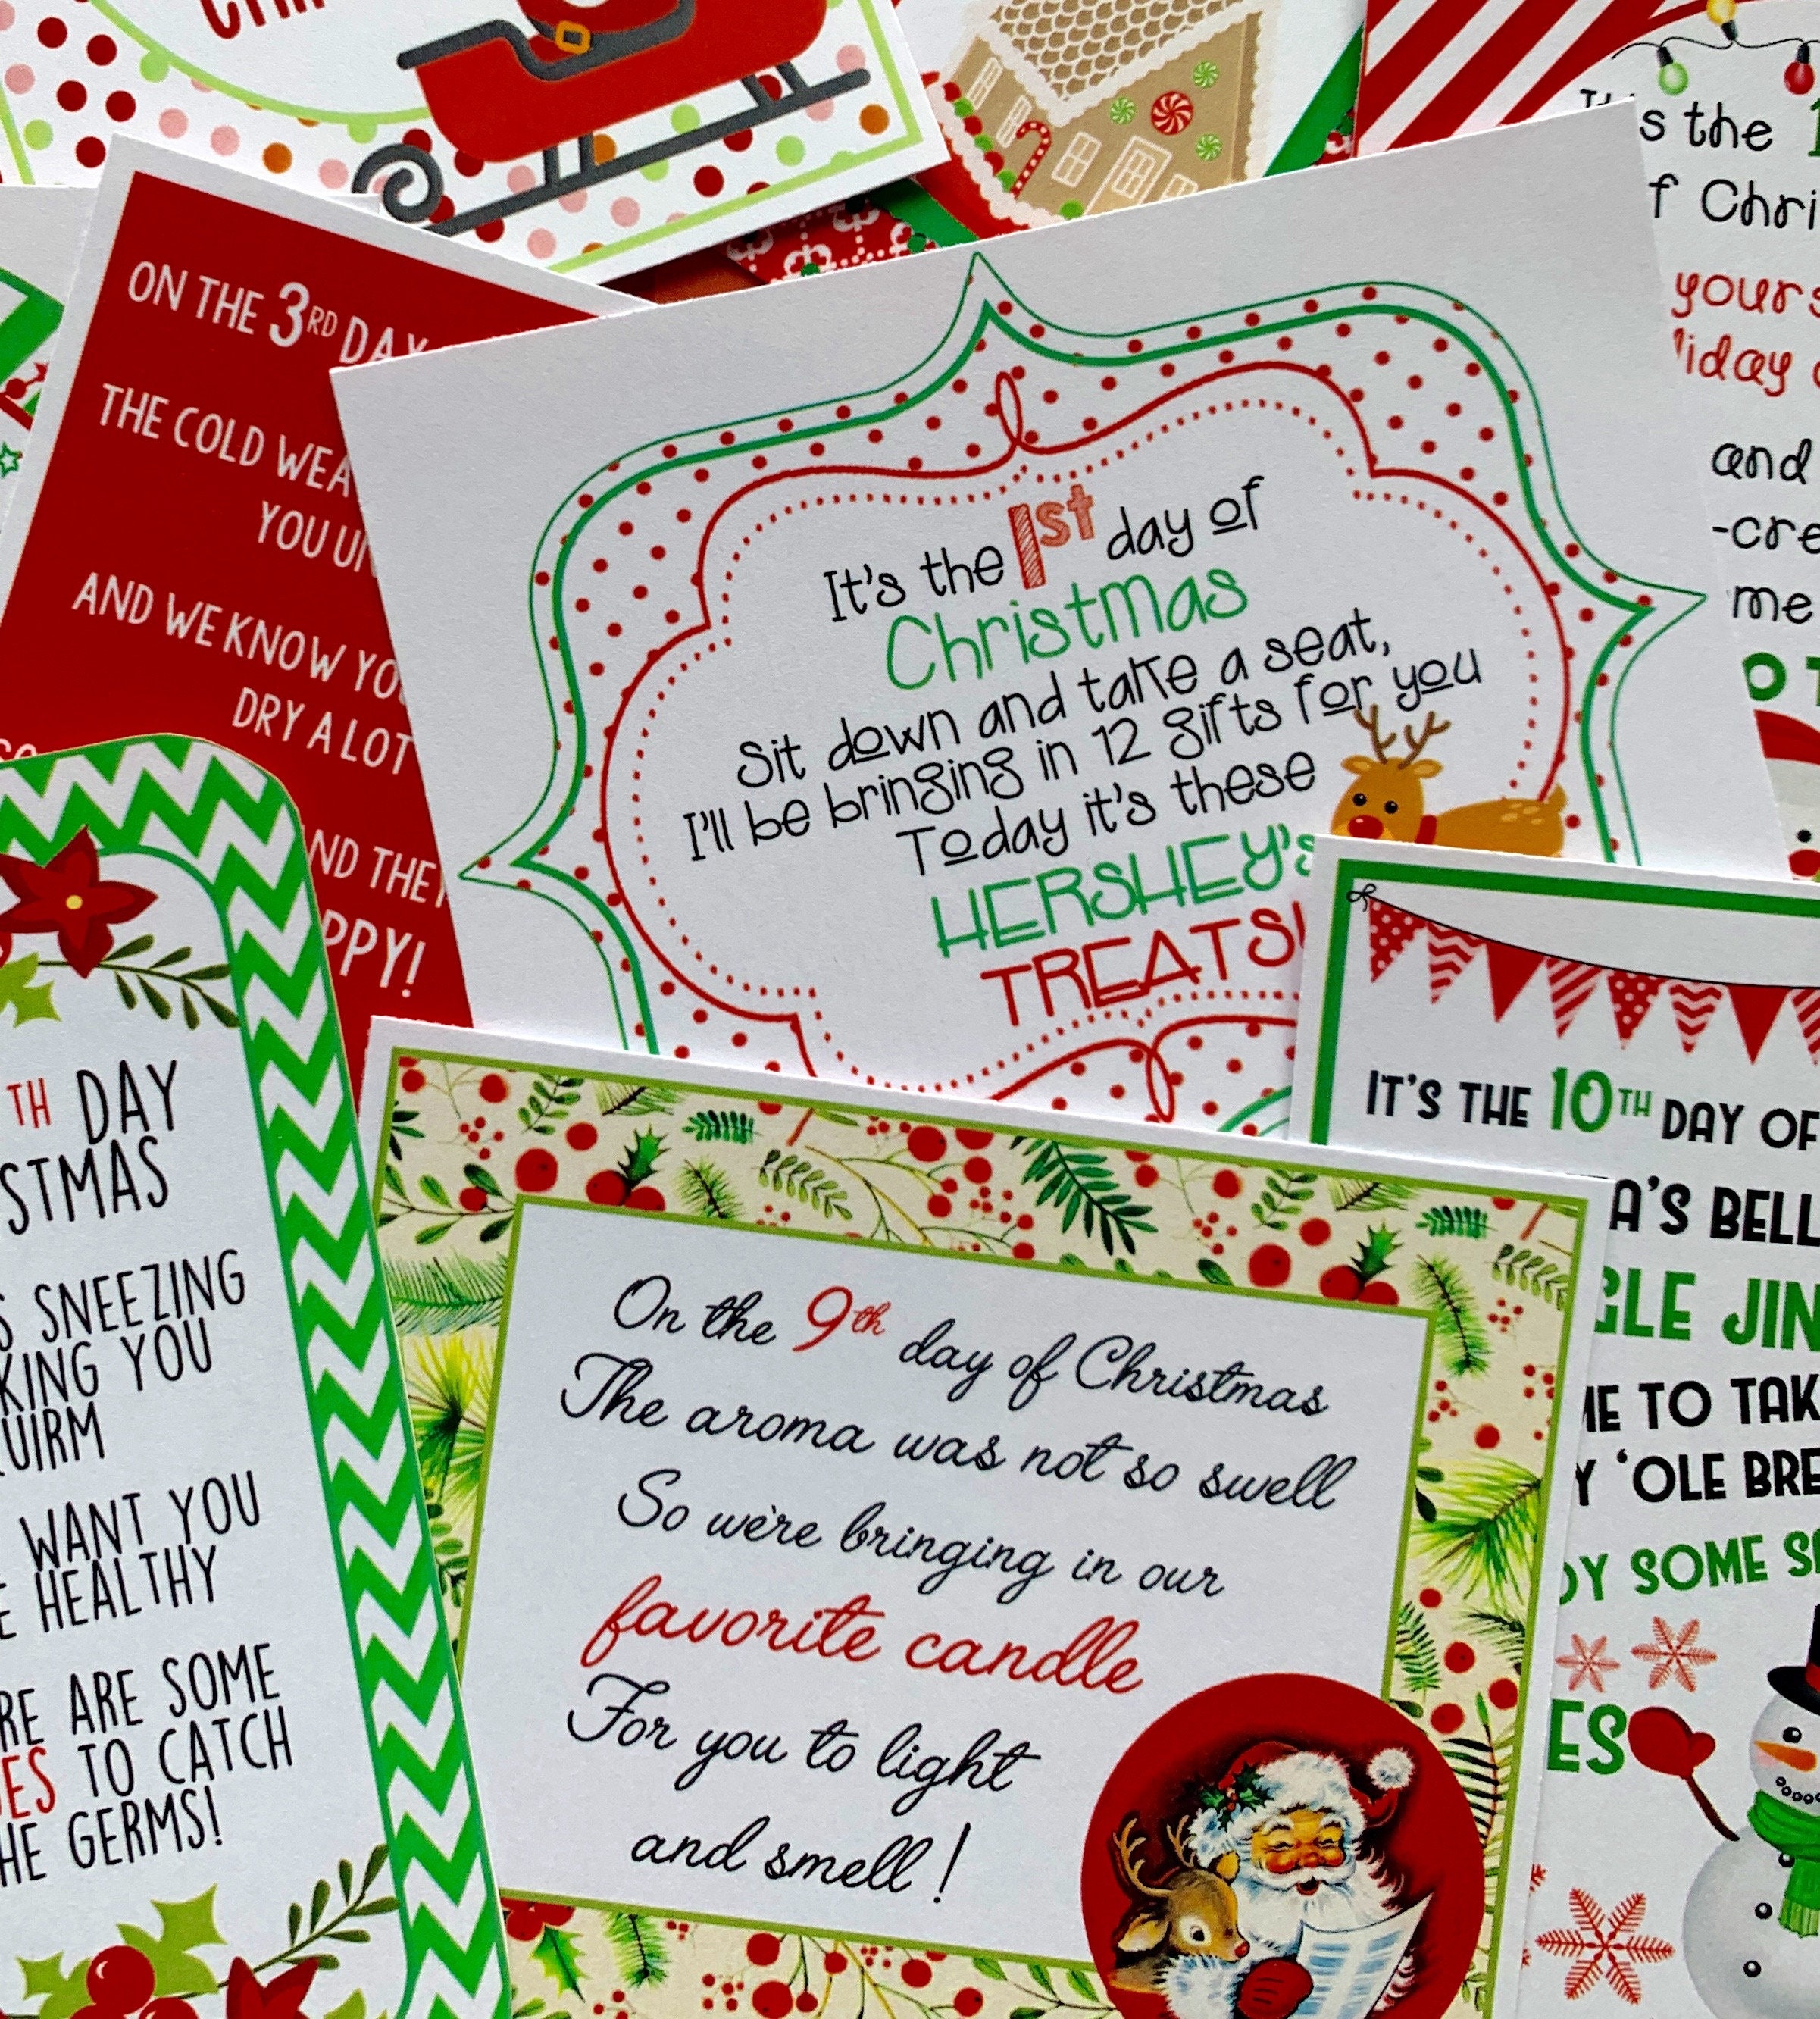 12 Days Of Christmas Pictures Printable